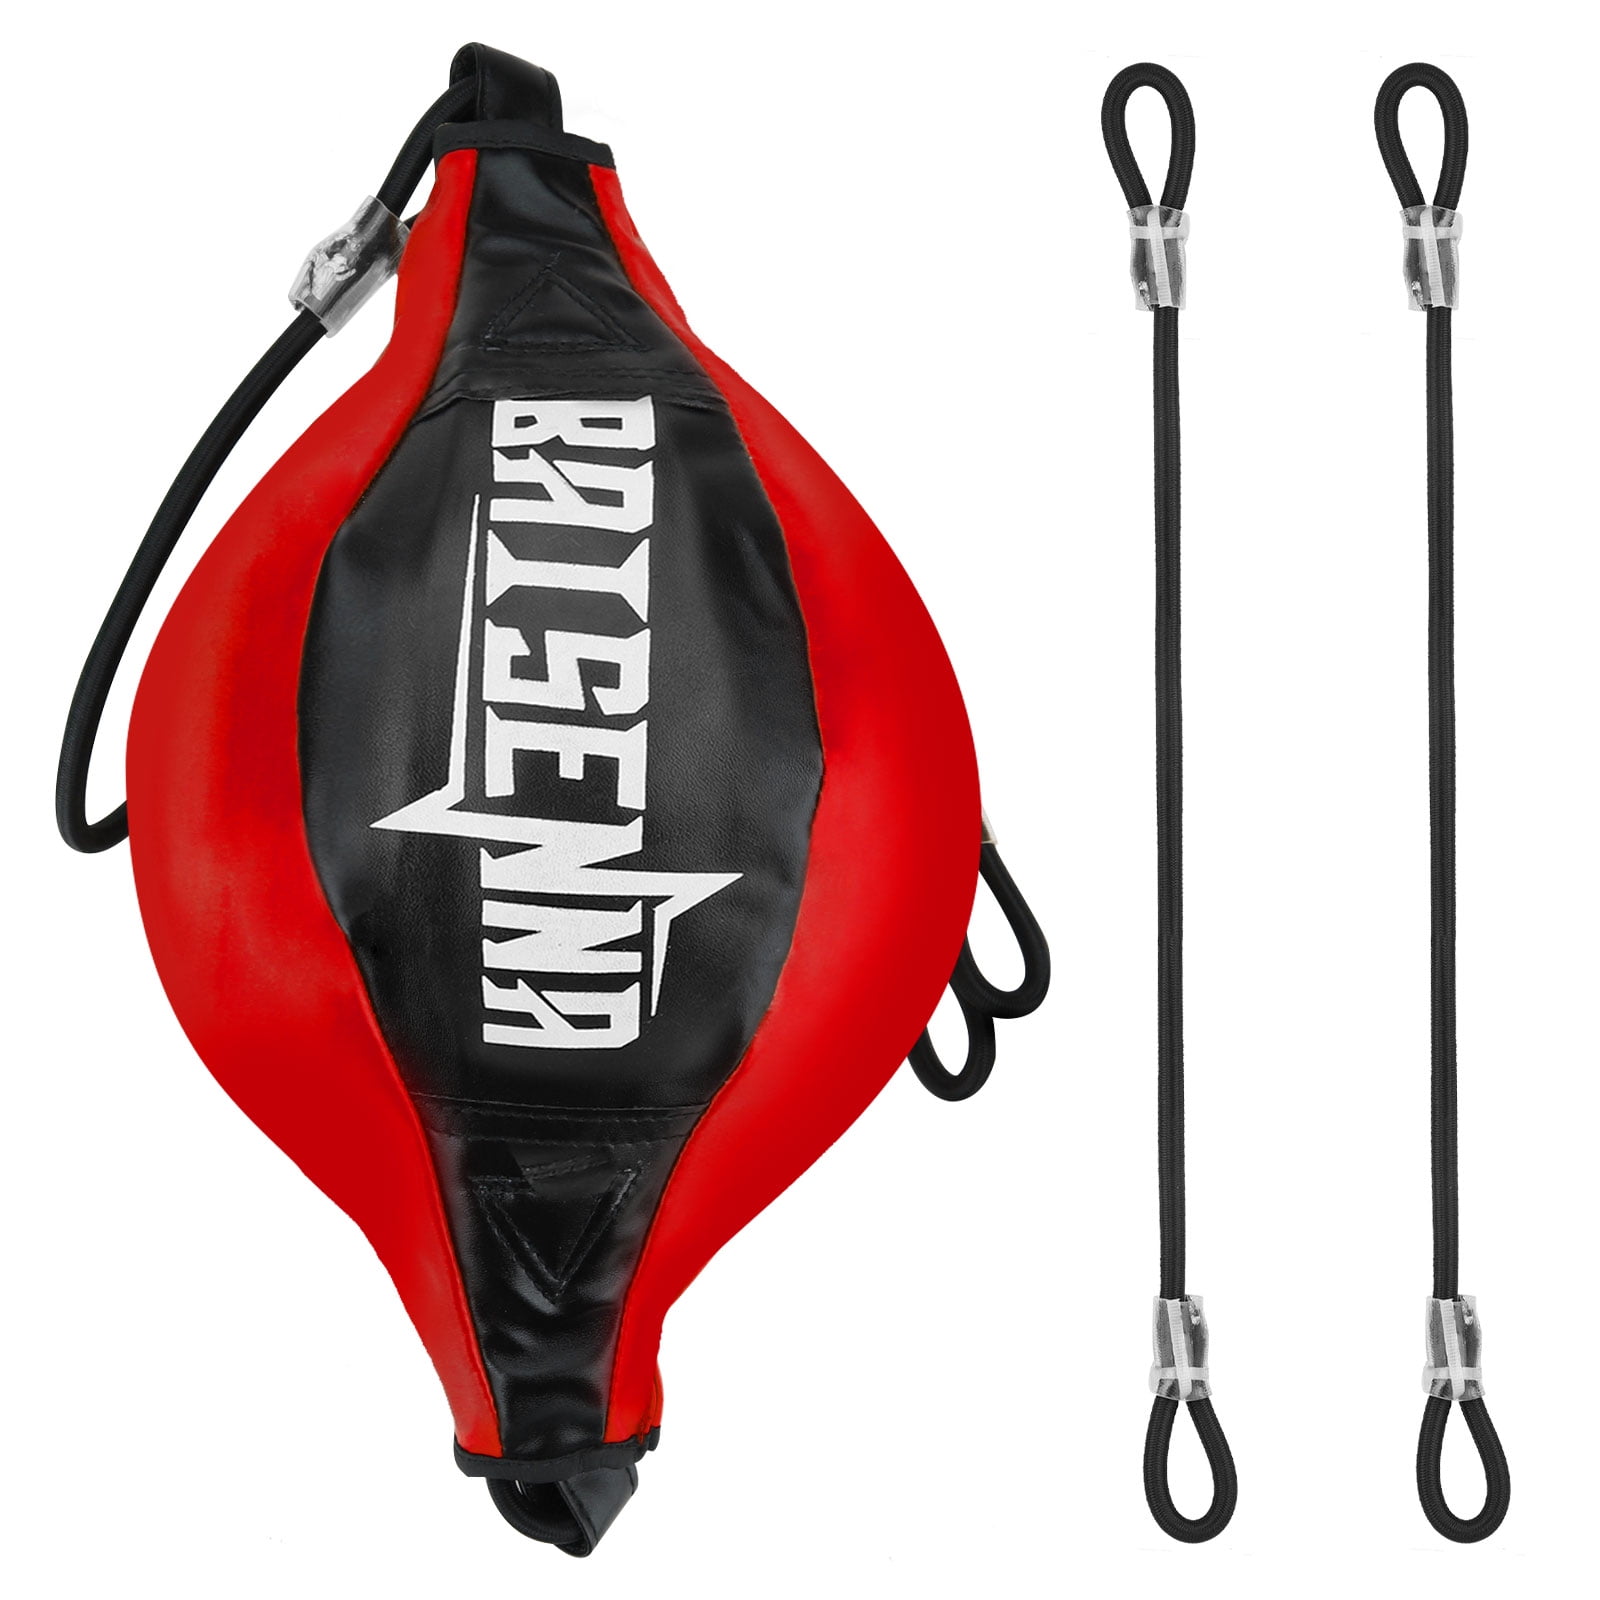 Velo Bean Ball Leather Double End Dodge MMA Boxing Floor to Ceiling Punch Bag Rope Workout 